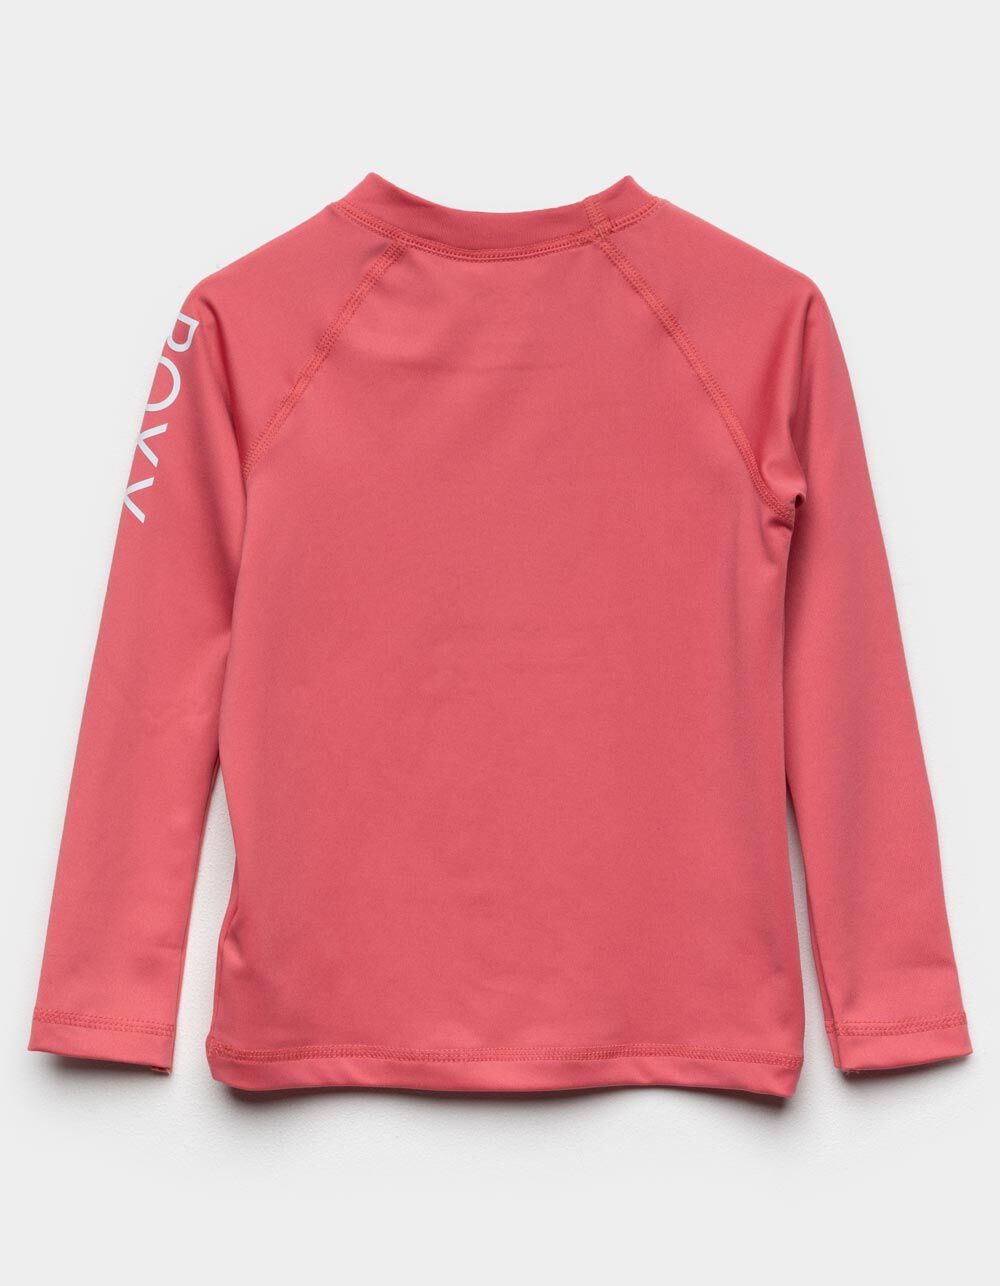 ROXY Whole Hearted Little Girls Pink Rash Guard (4-6) - PINK | Tillys